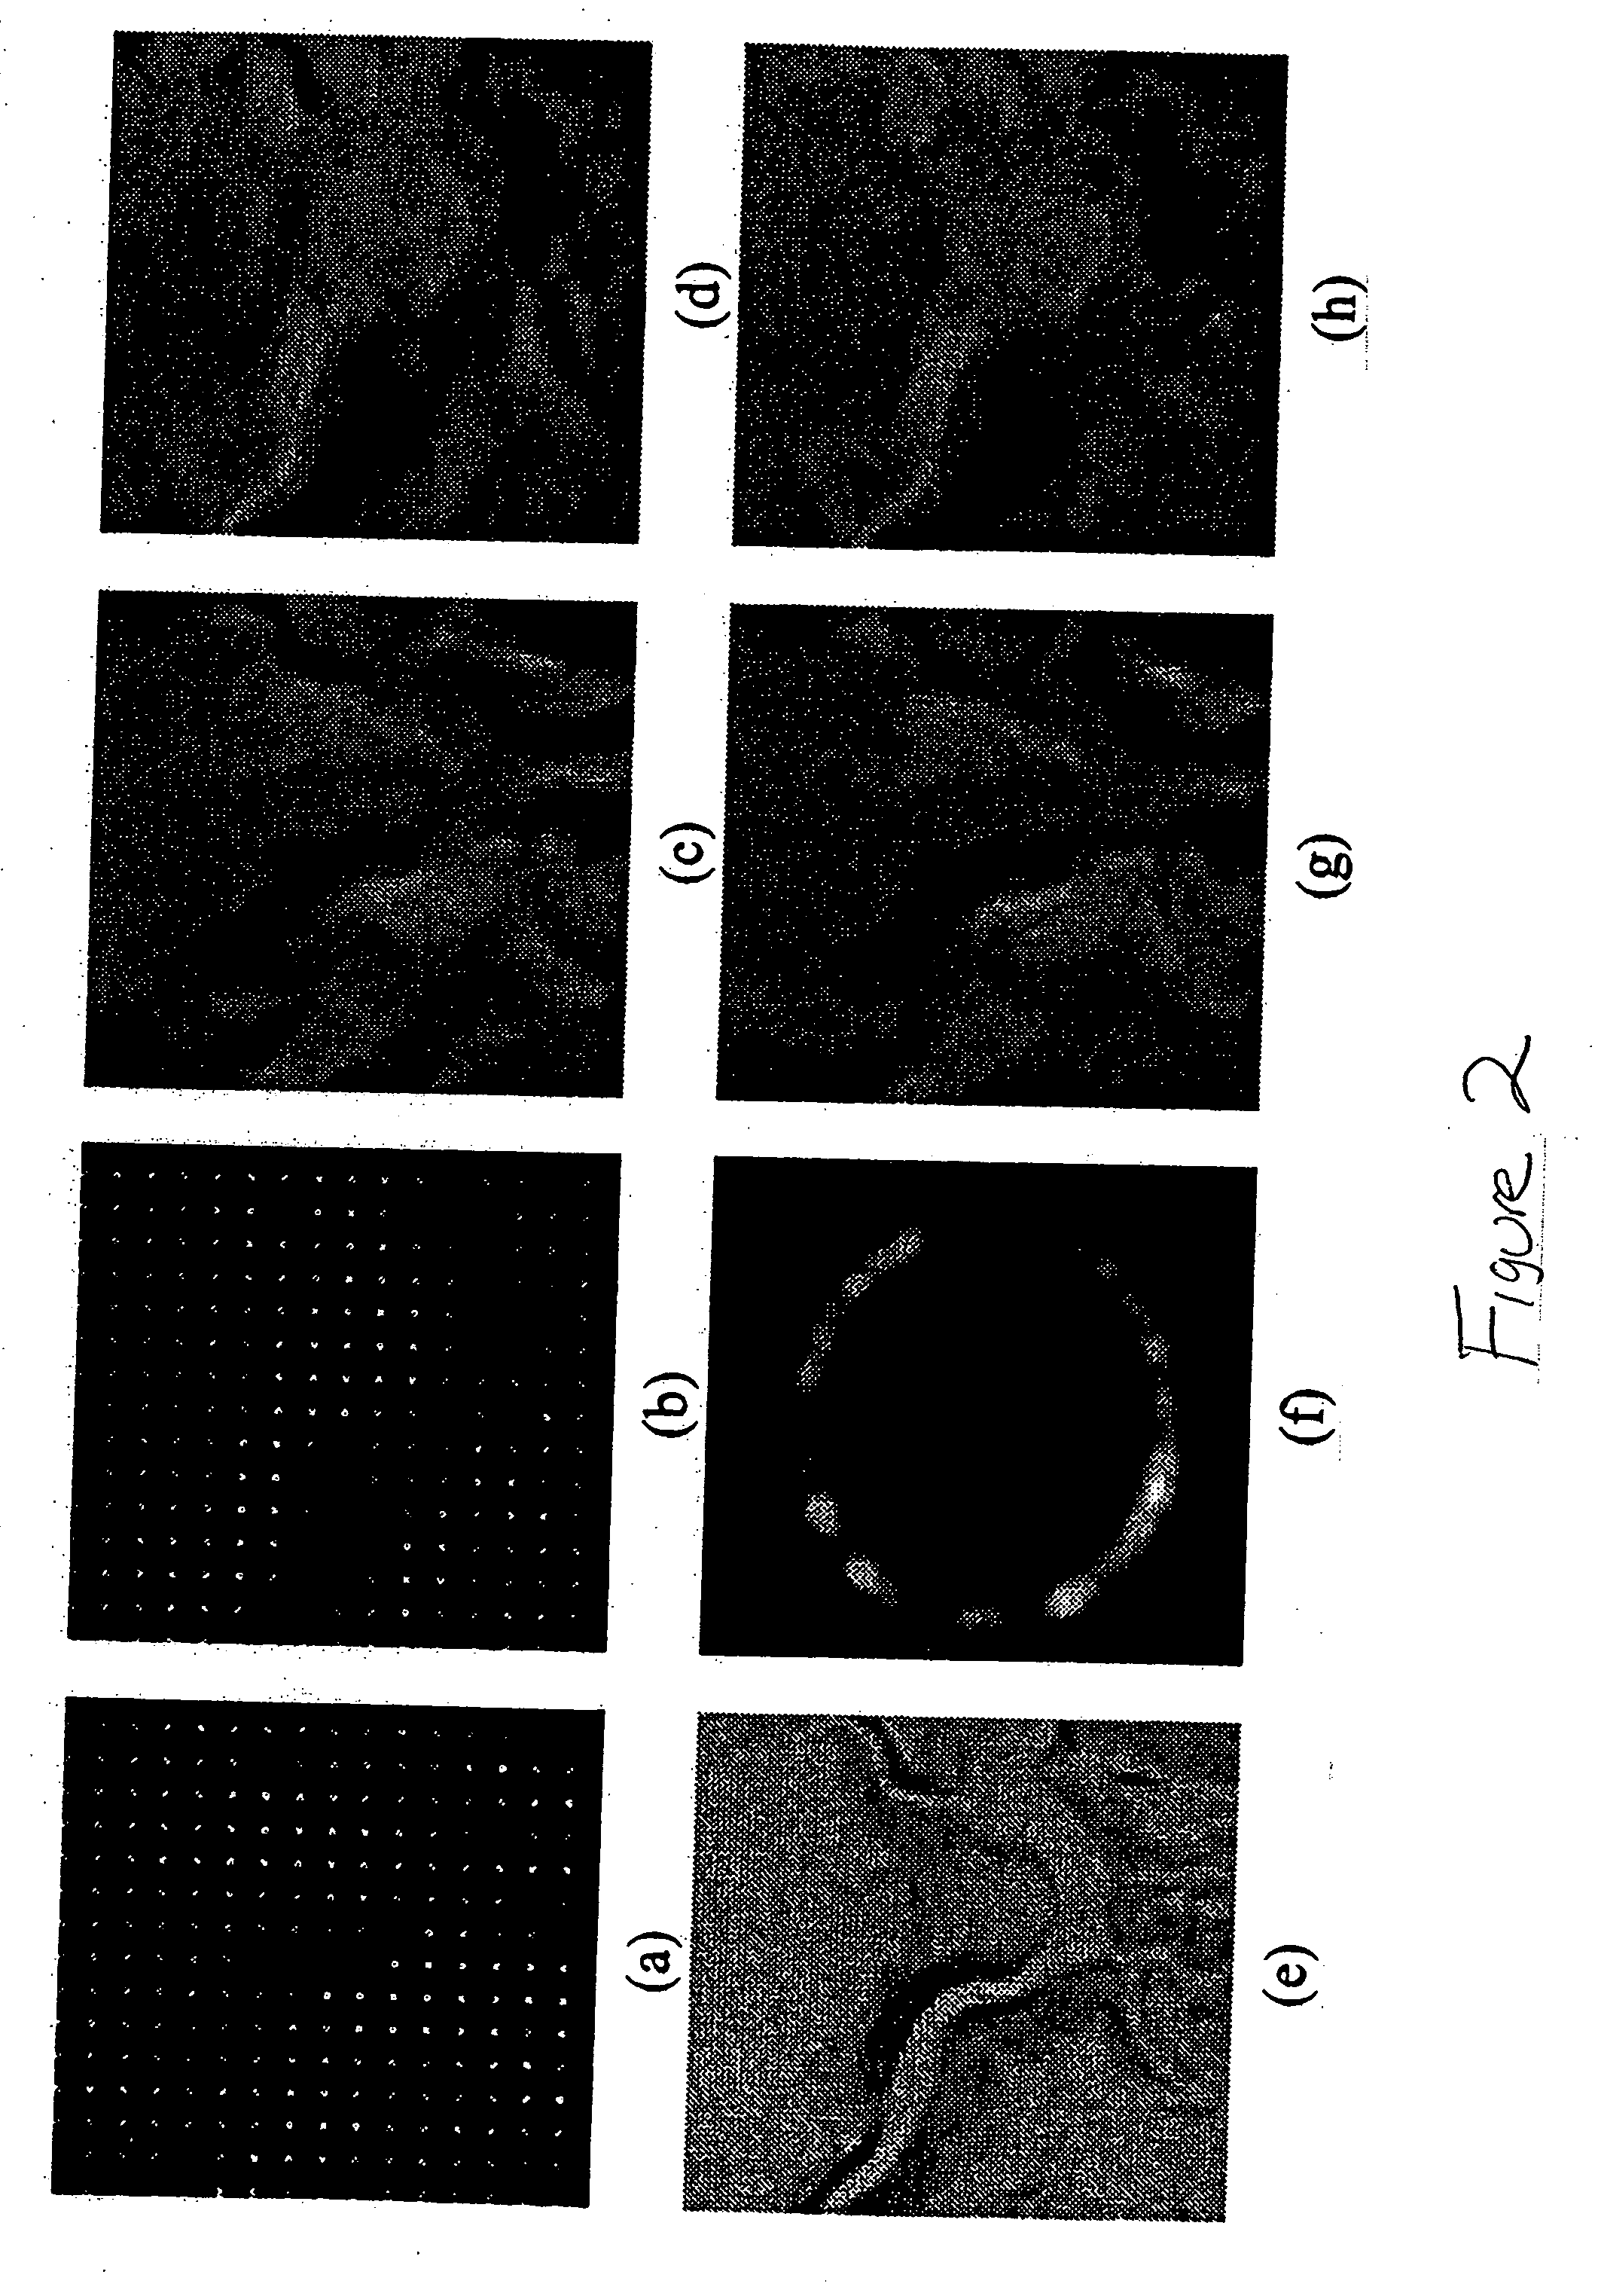 Method and apparatus for propagating high resolution detail between multimodal data sets